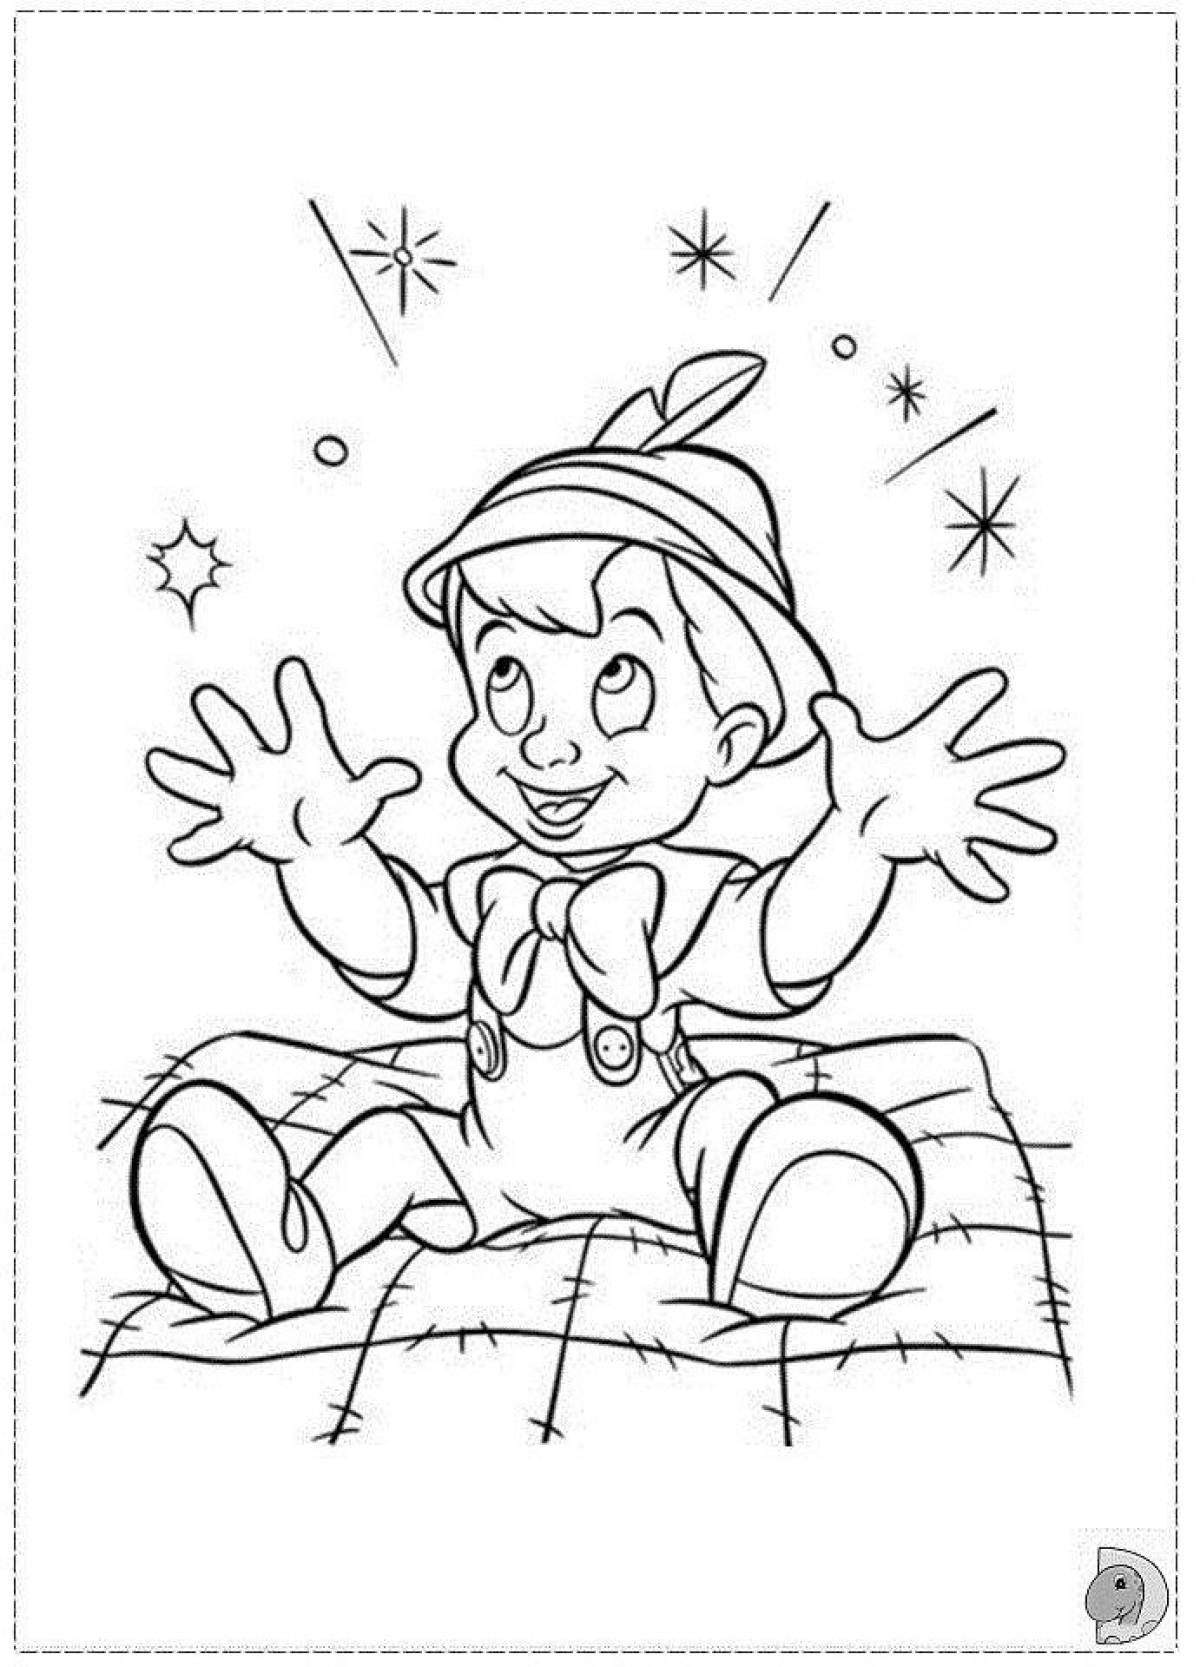 Charming Pinocchio coloring book